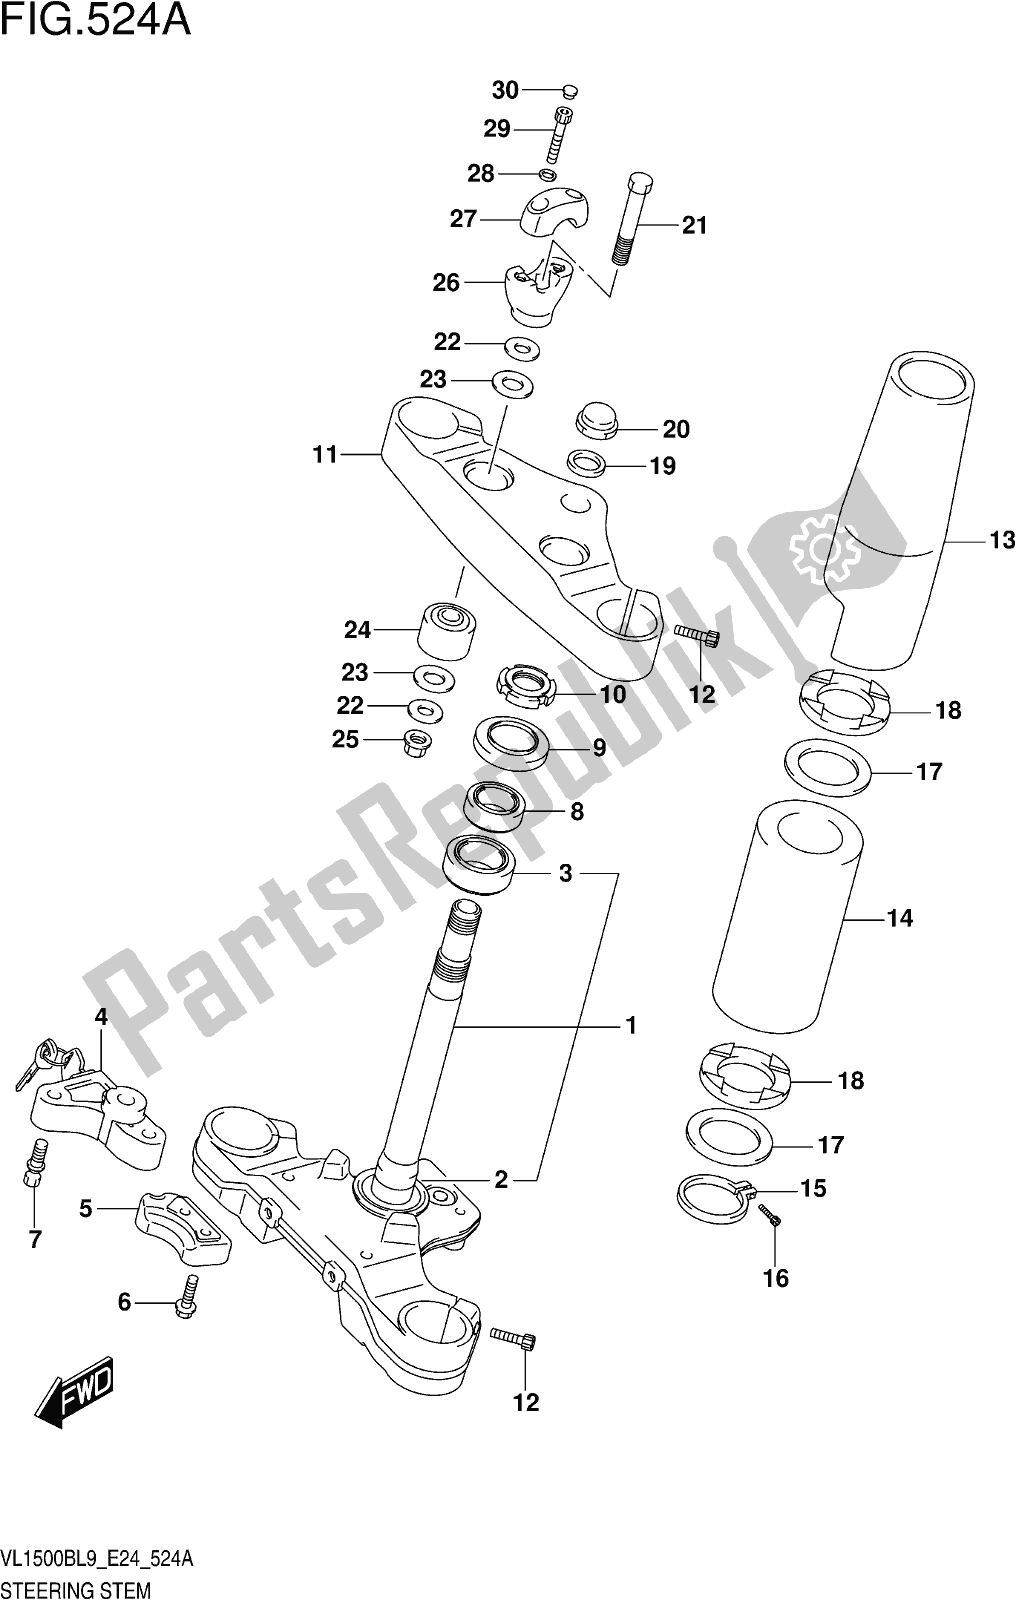 All parts for the Fig. 524a Steering Stem of the Suzuki VL 1500B 2019